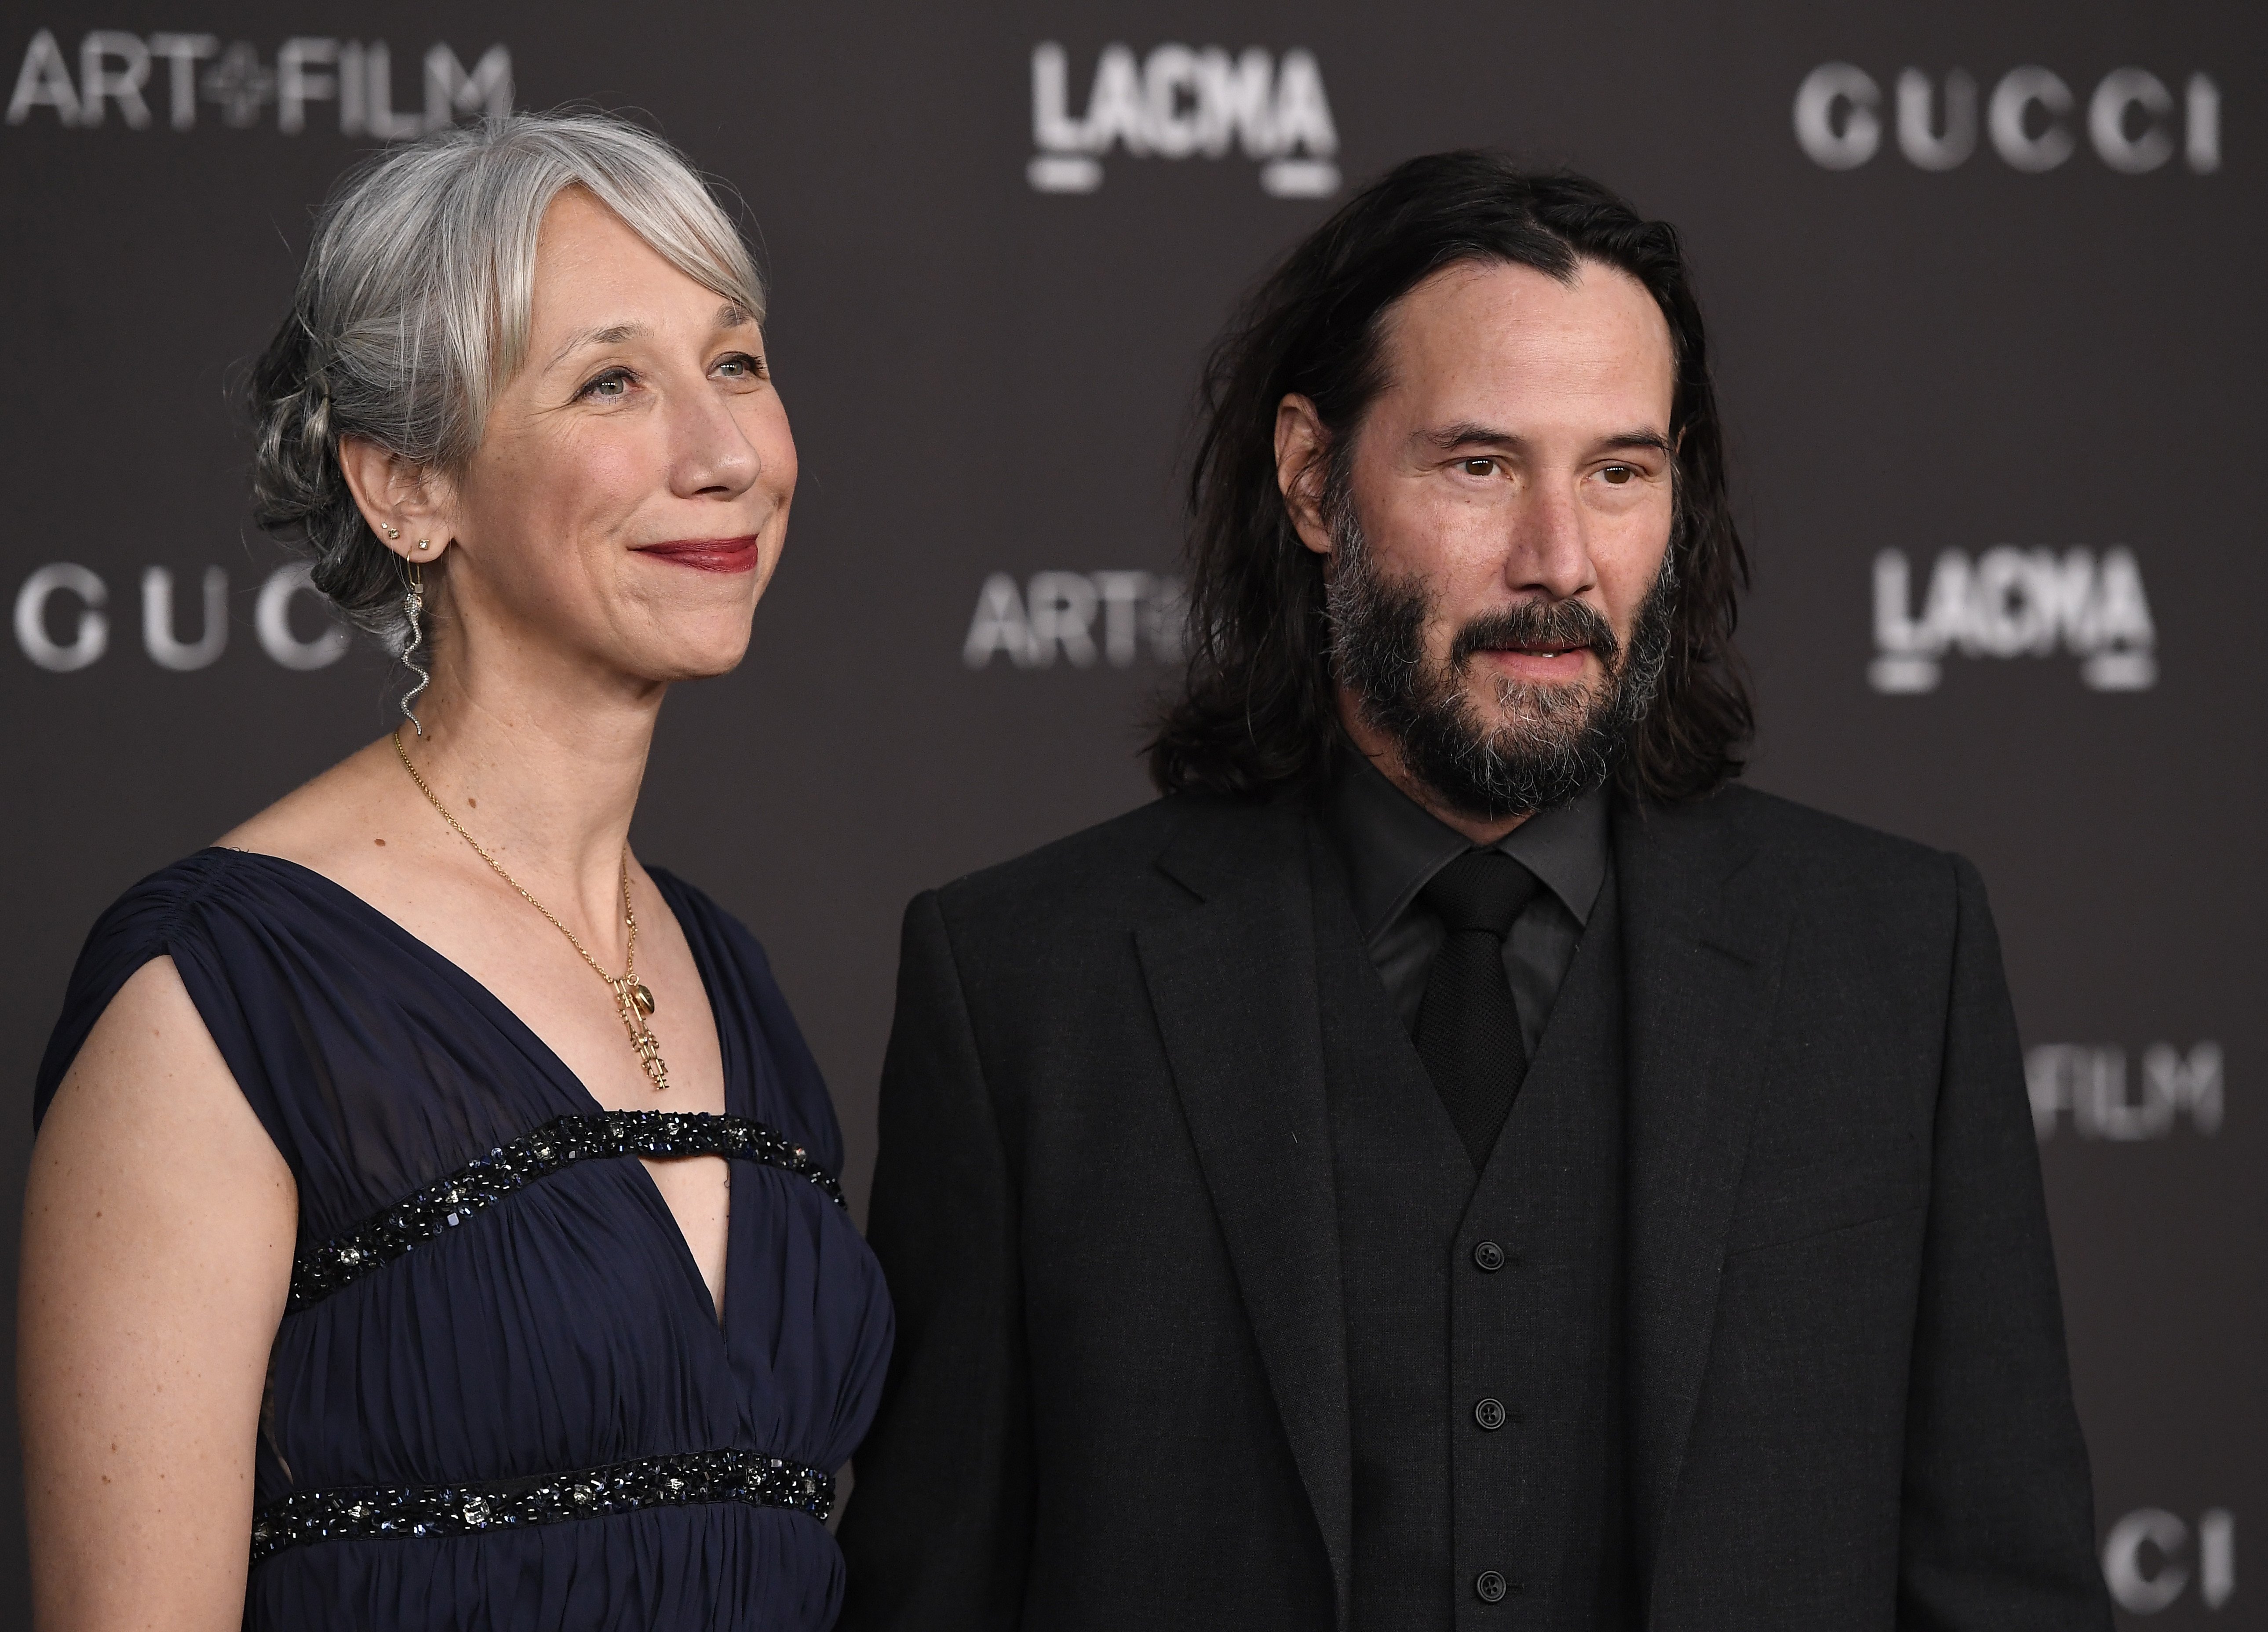 Alexandra Grant and Keanu Reeves attending the 2019 LACMA 2019 Art + Film Gala on November 02, 2019 in Los Angeles, California. / Source: Getty Images